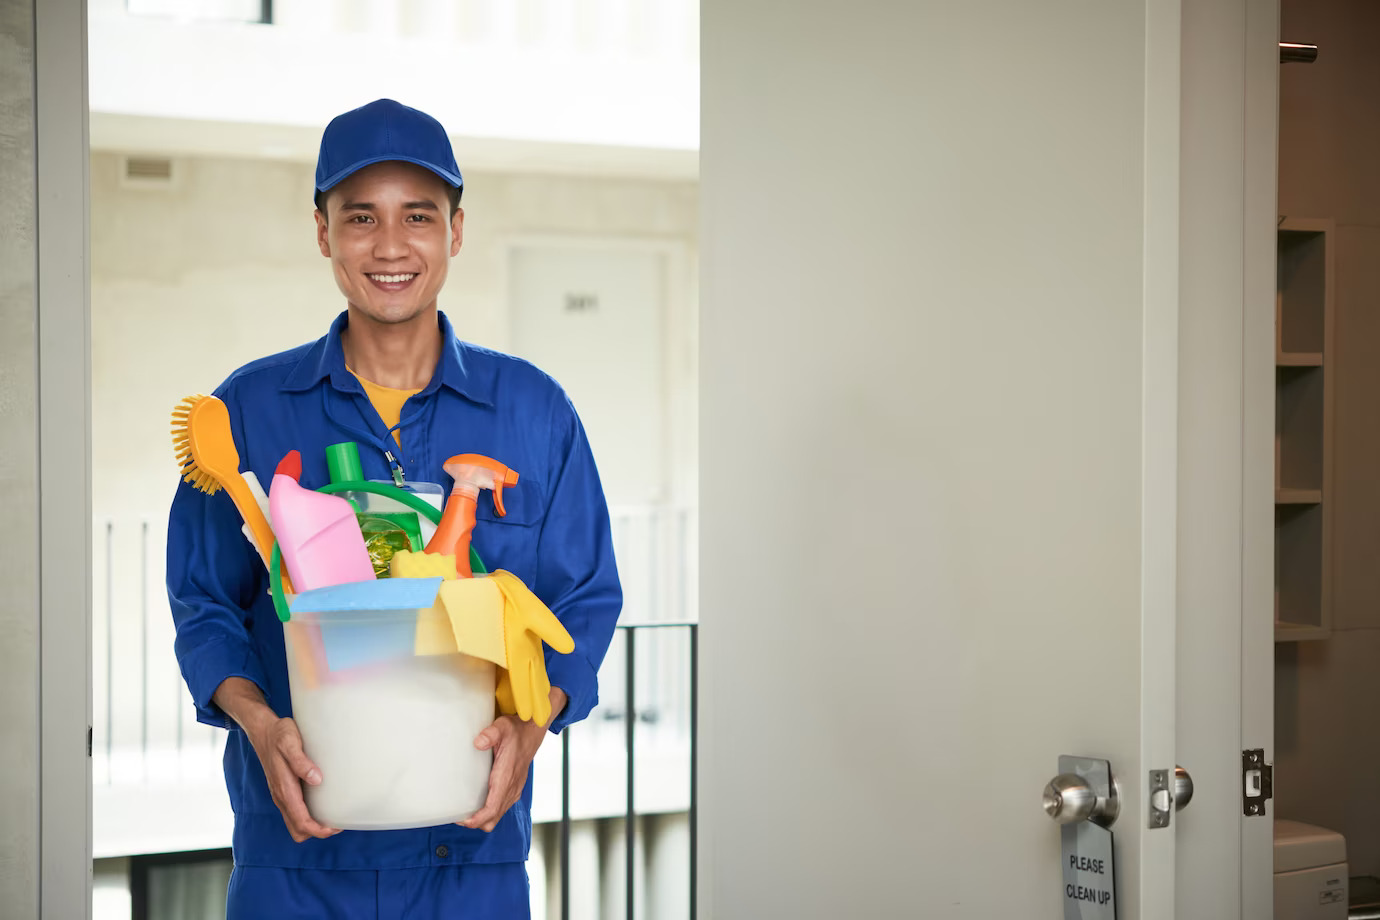 Landlord Cleaning Services in Lad Brook Grove